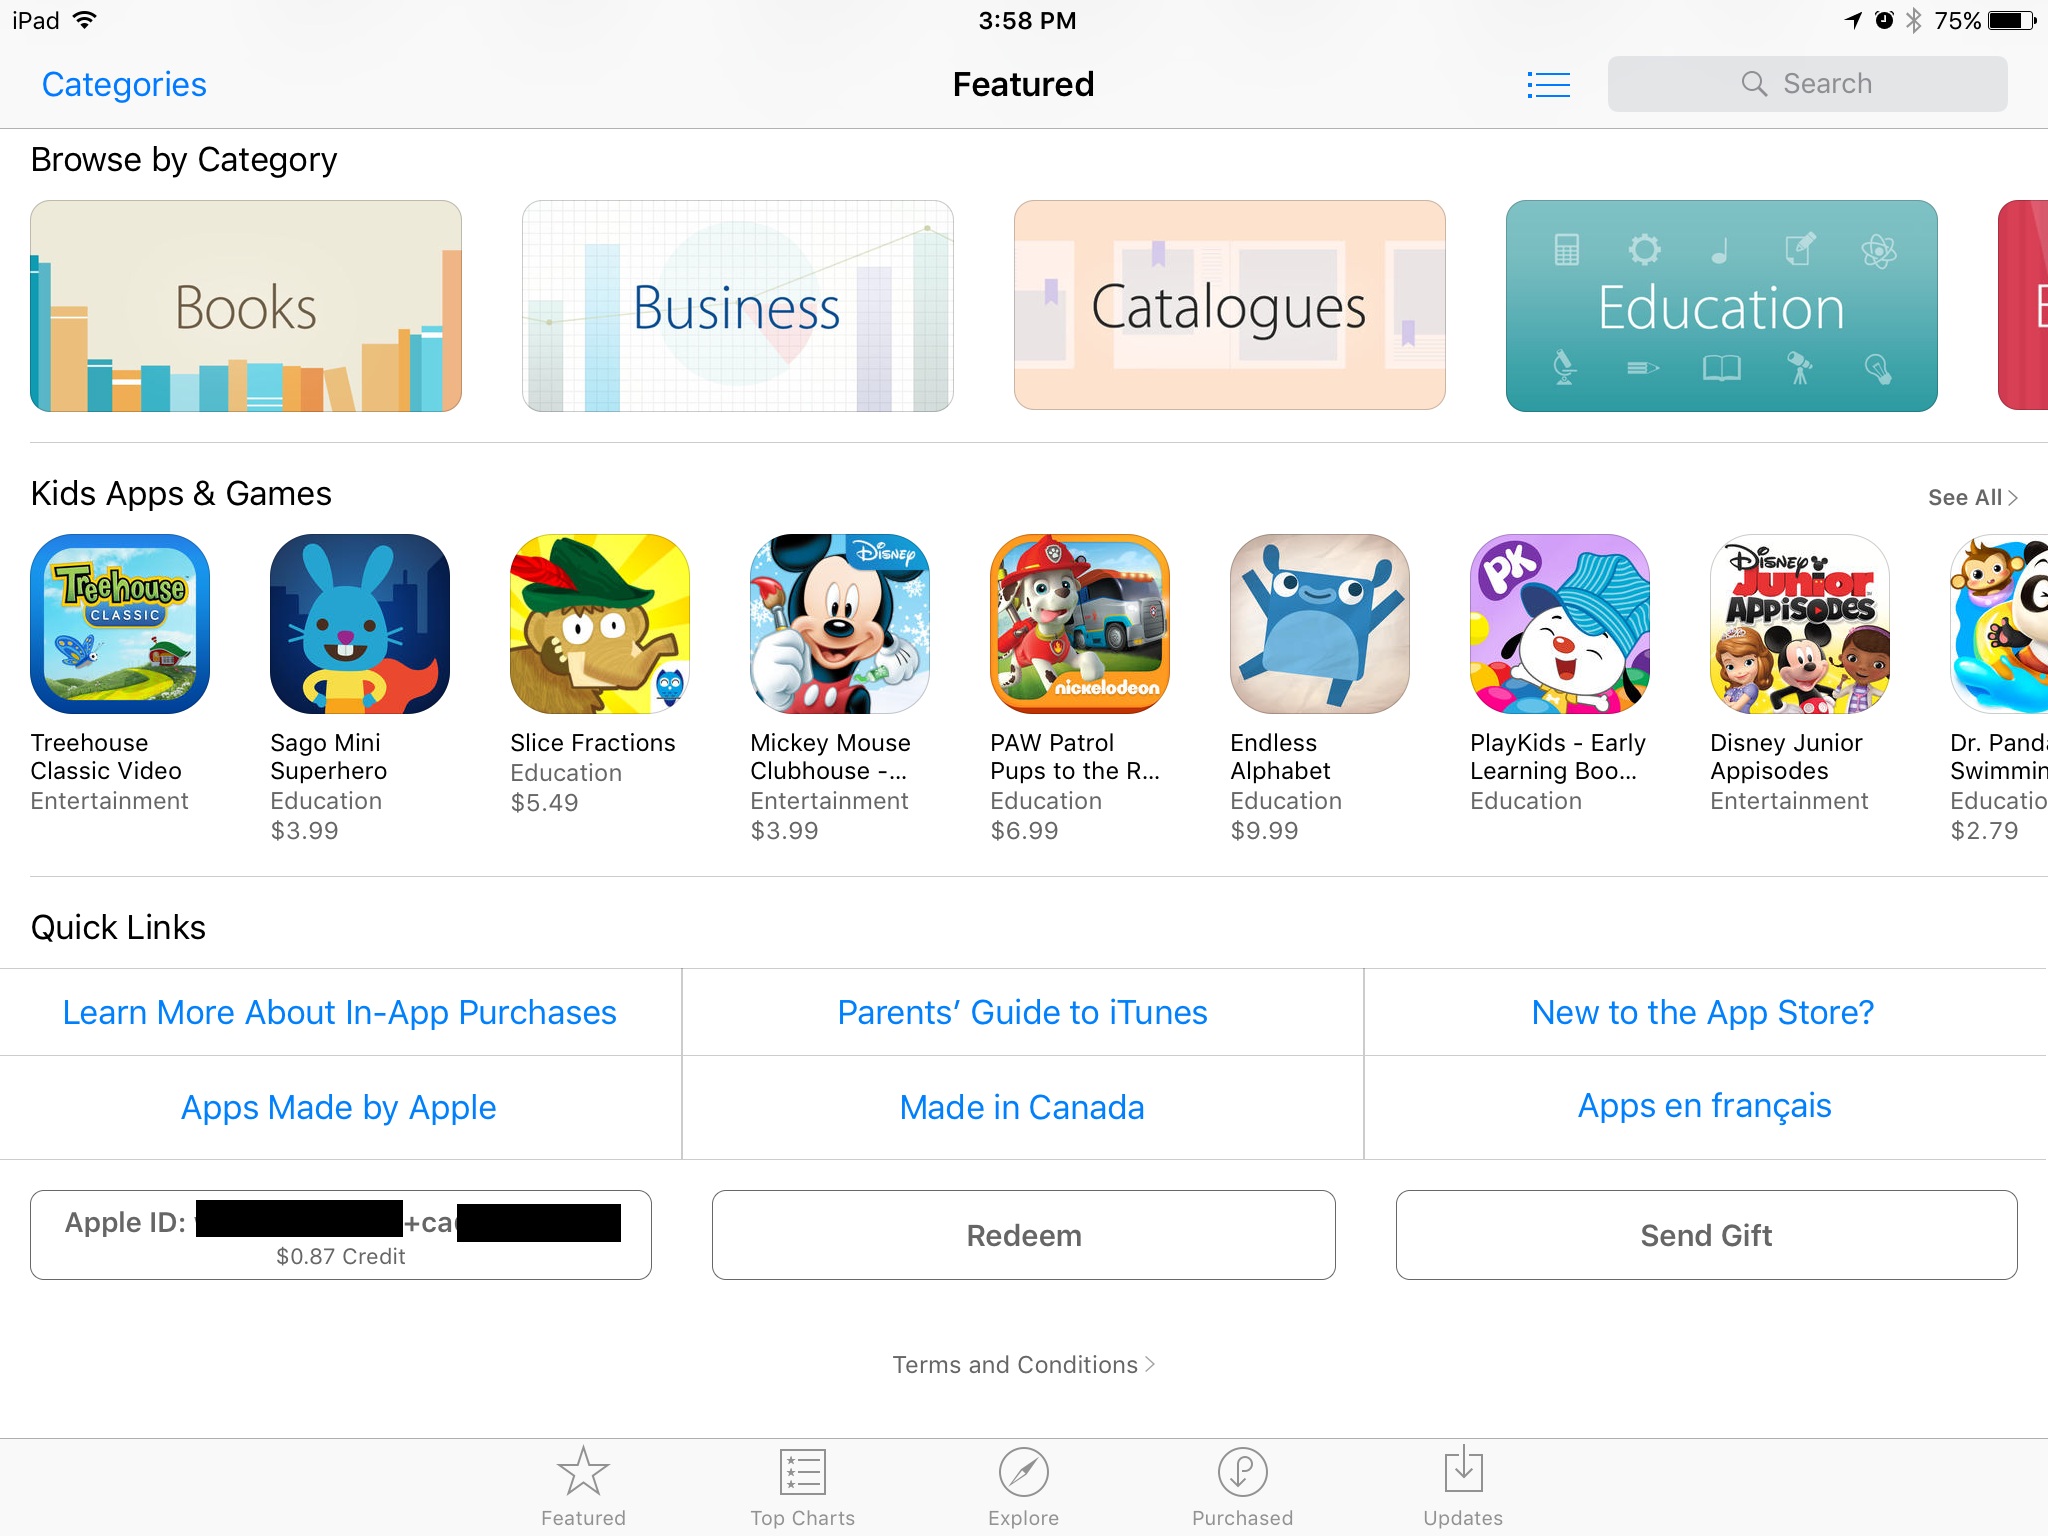 How to Soft Launch - Apple ID on App Store